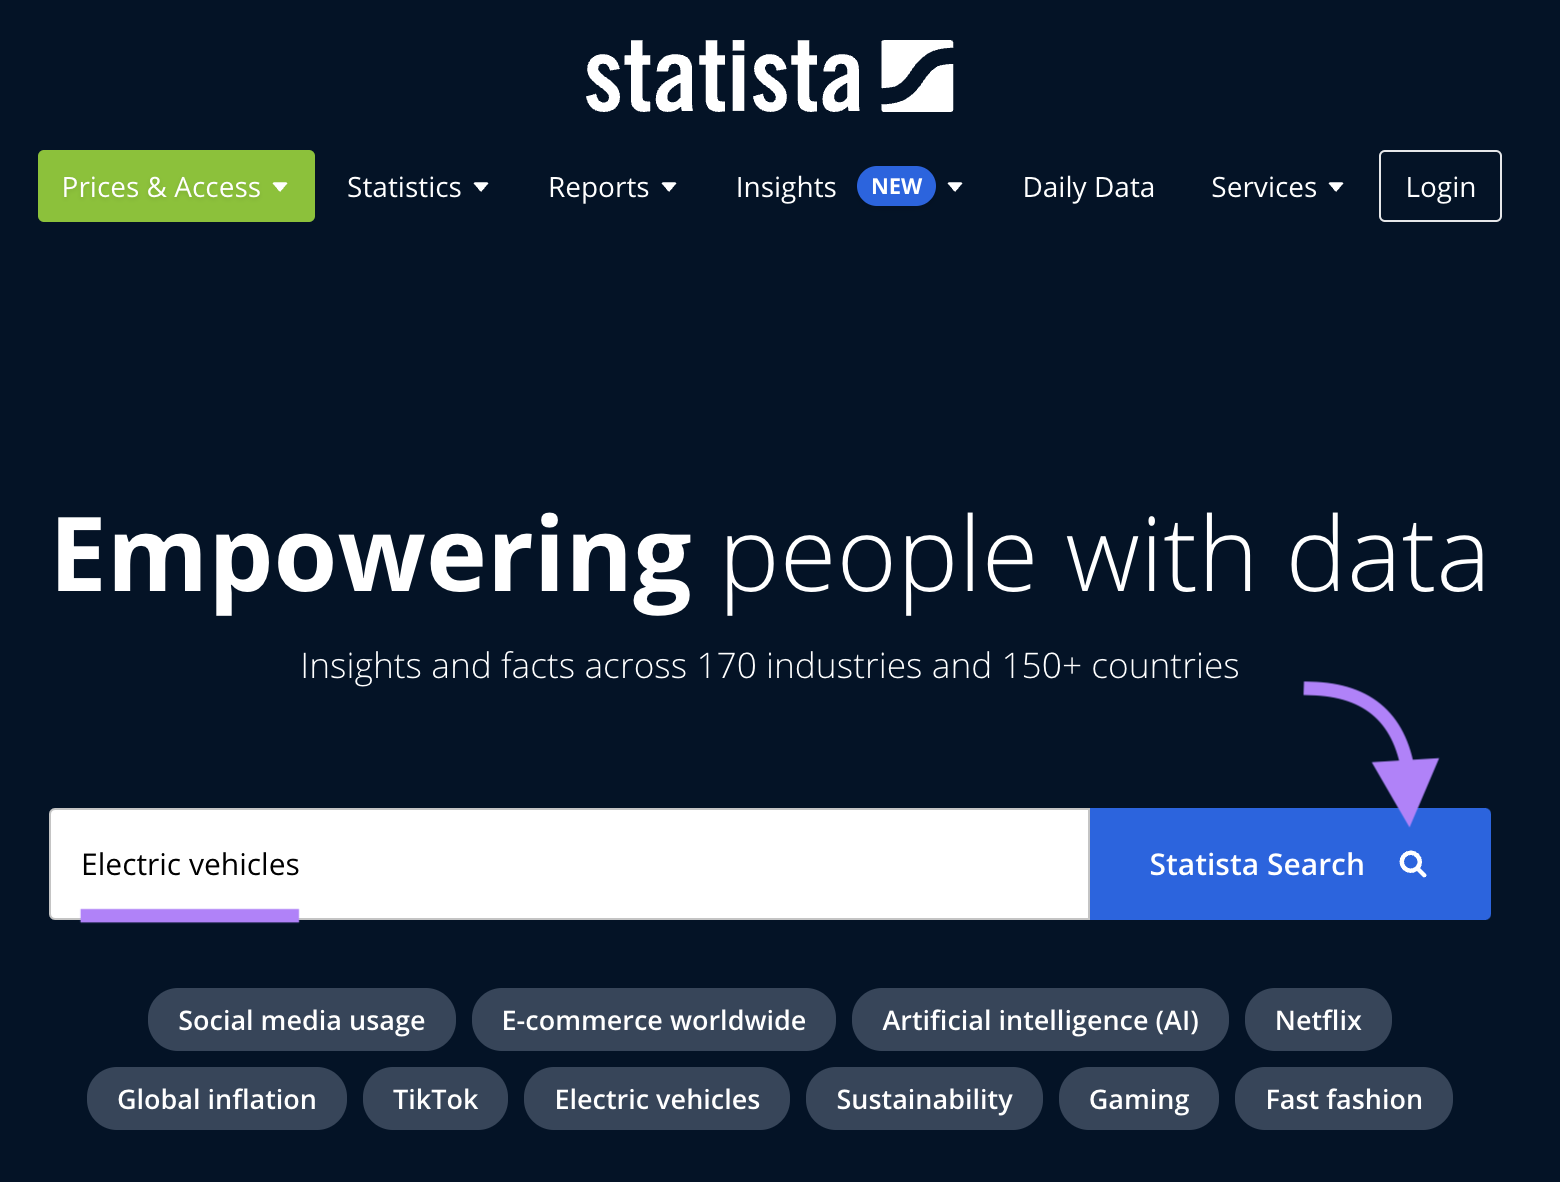 Statista website with "Empowering people with data" title